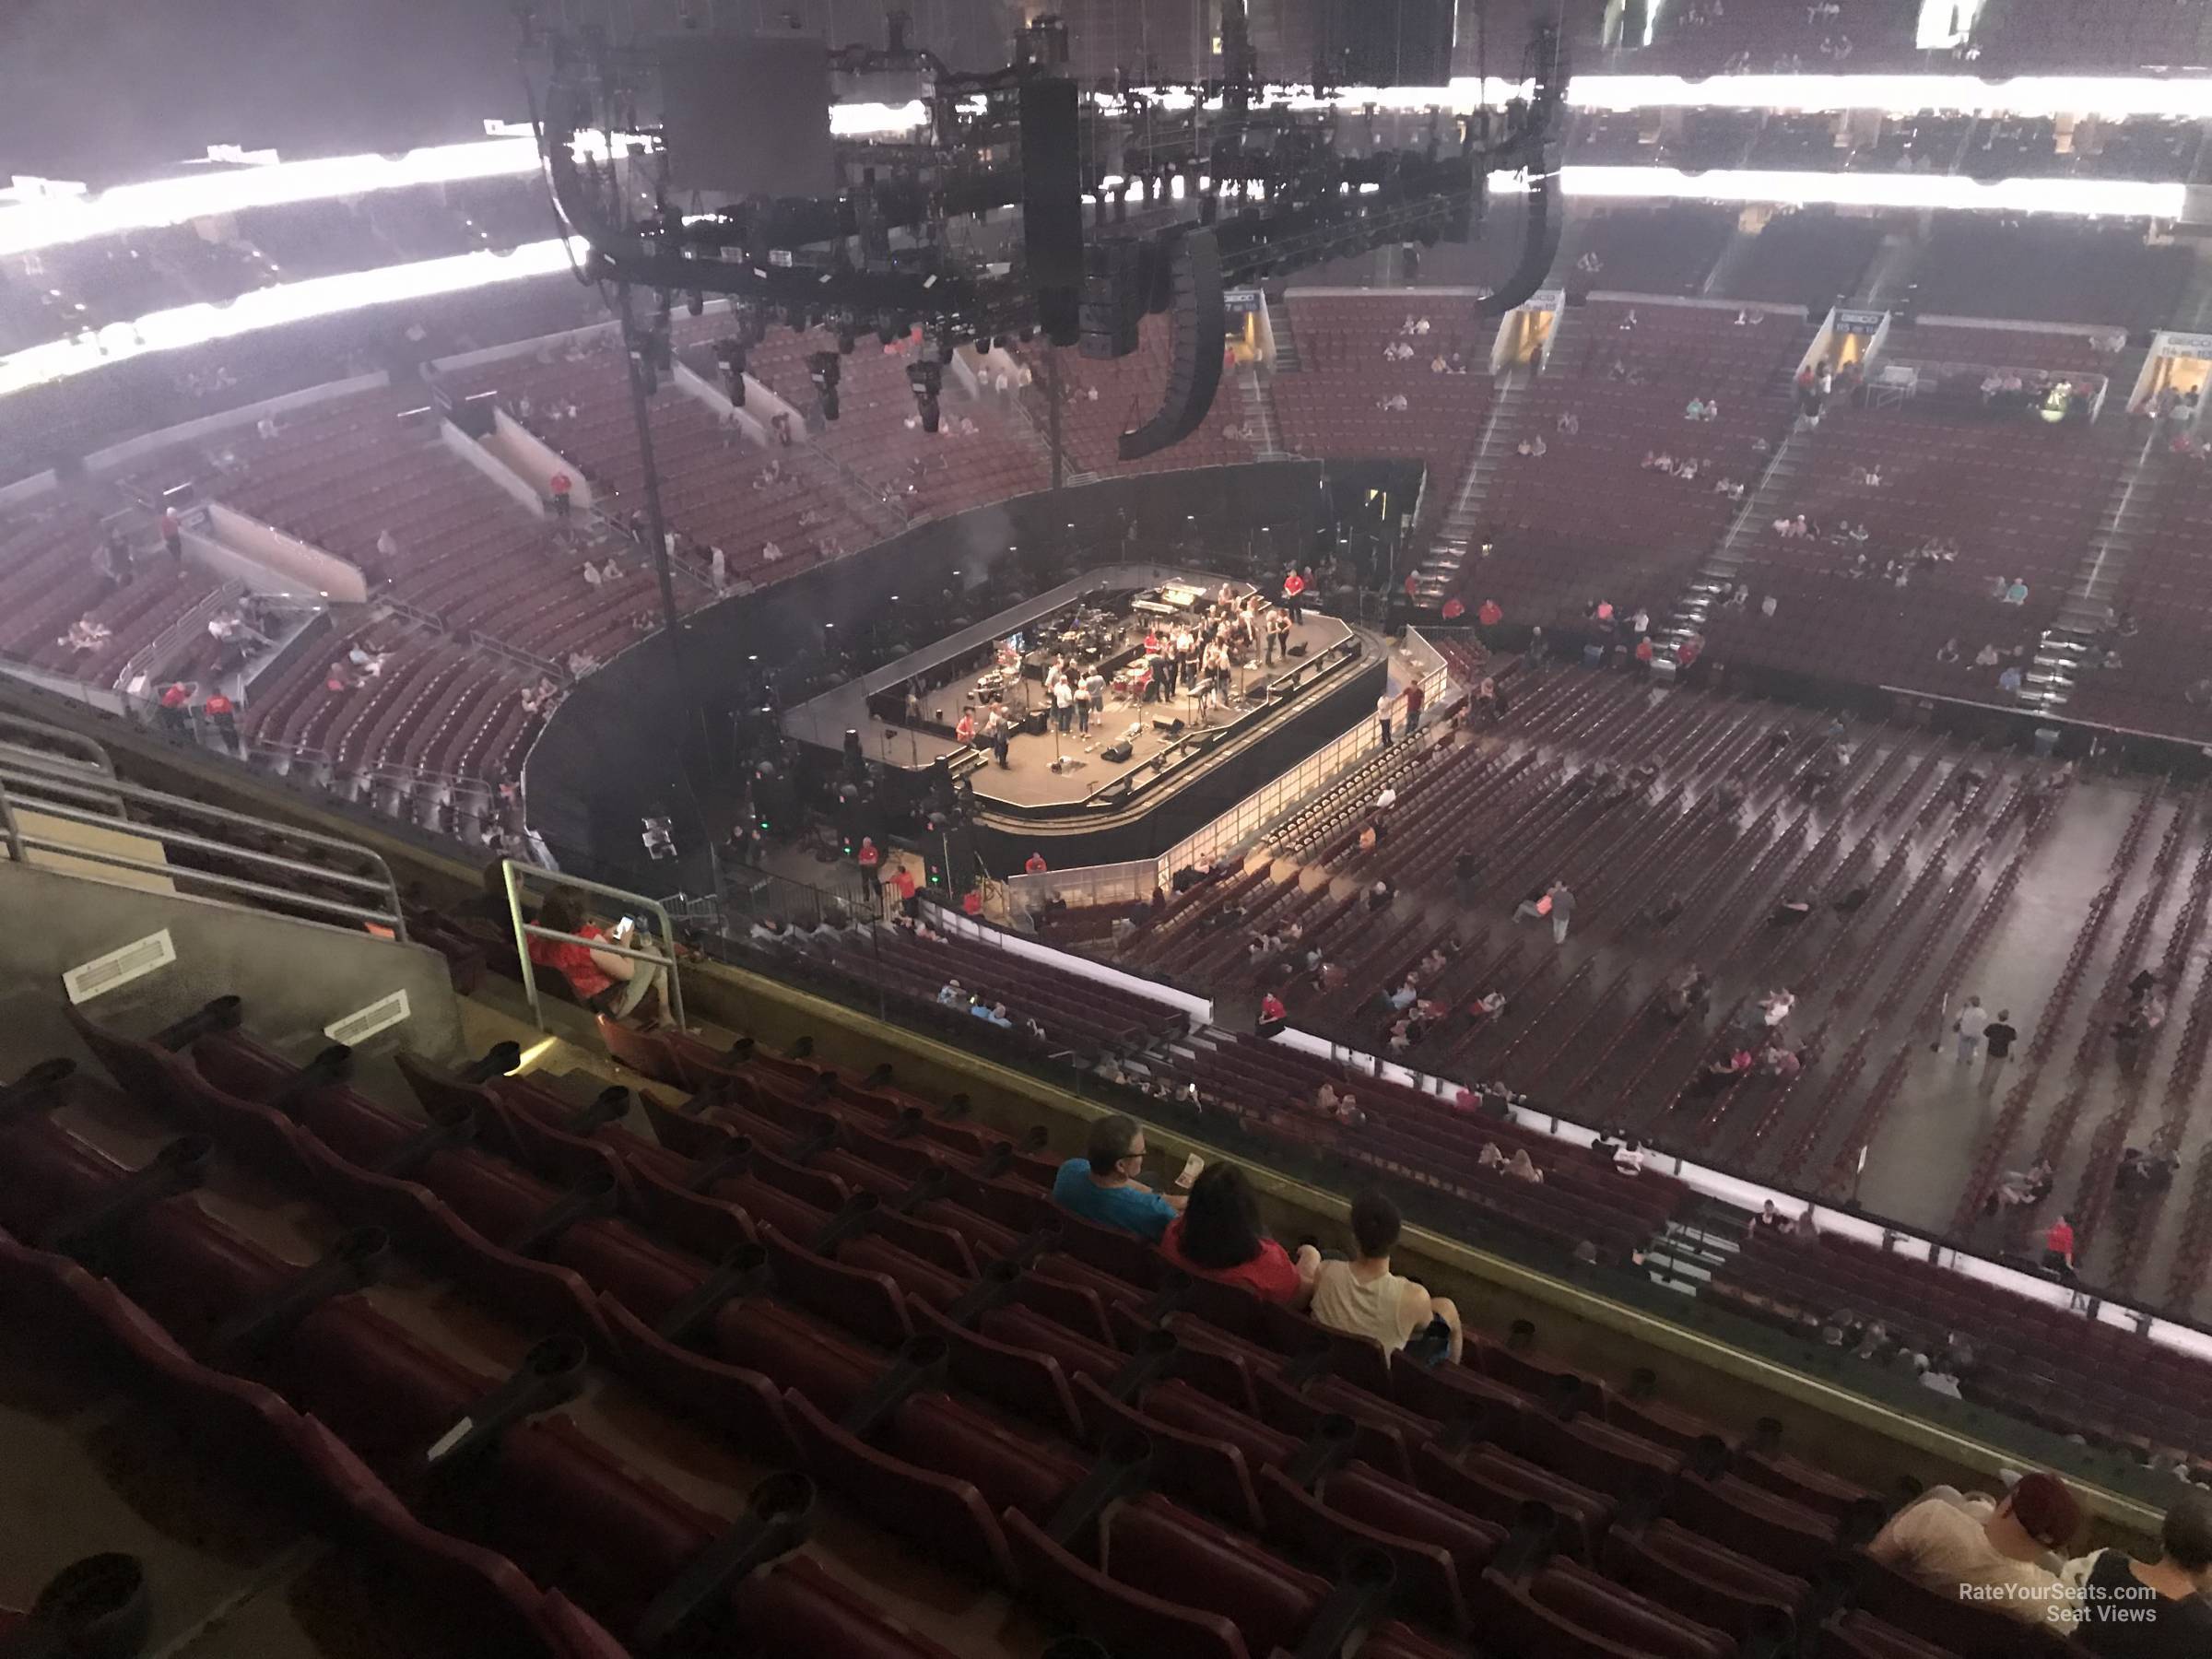 section 201, row 7 seat view  for concert - wells fargo center